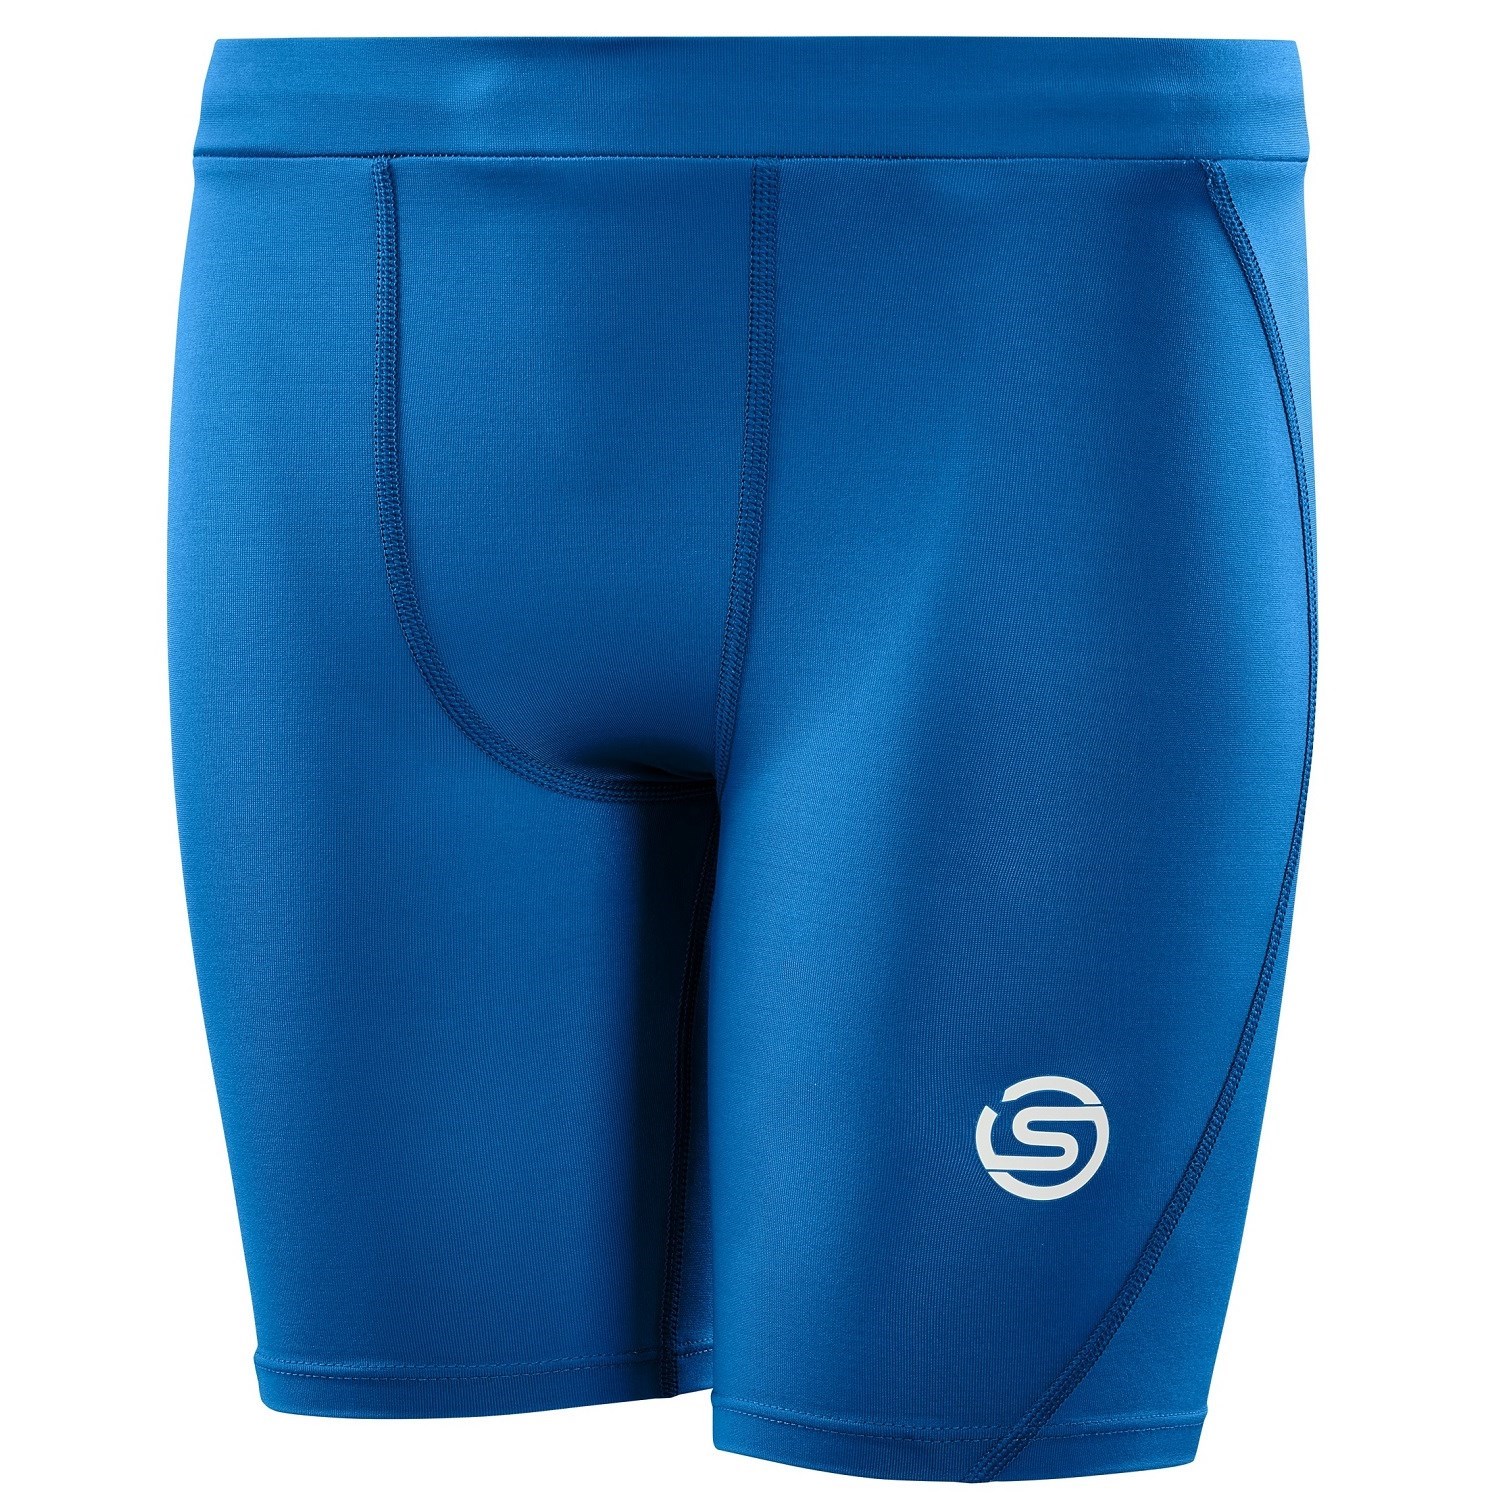 Skins Series-1 Youth Kids Compression Half Tights - Bright Blue